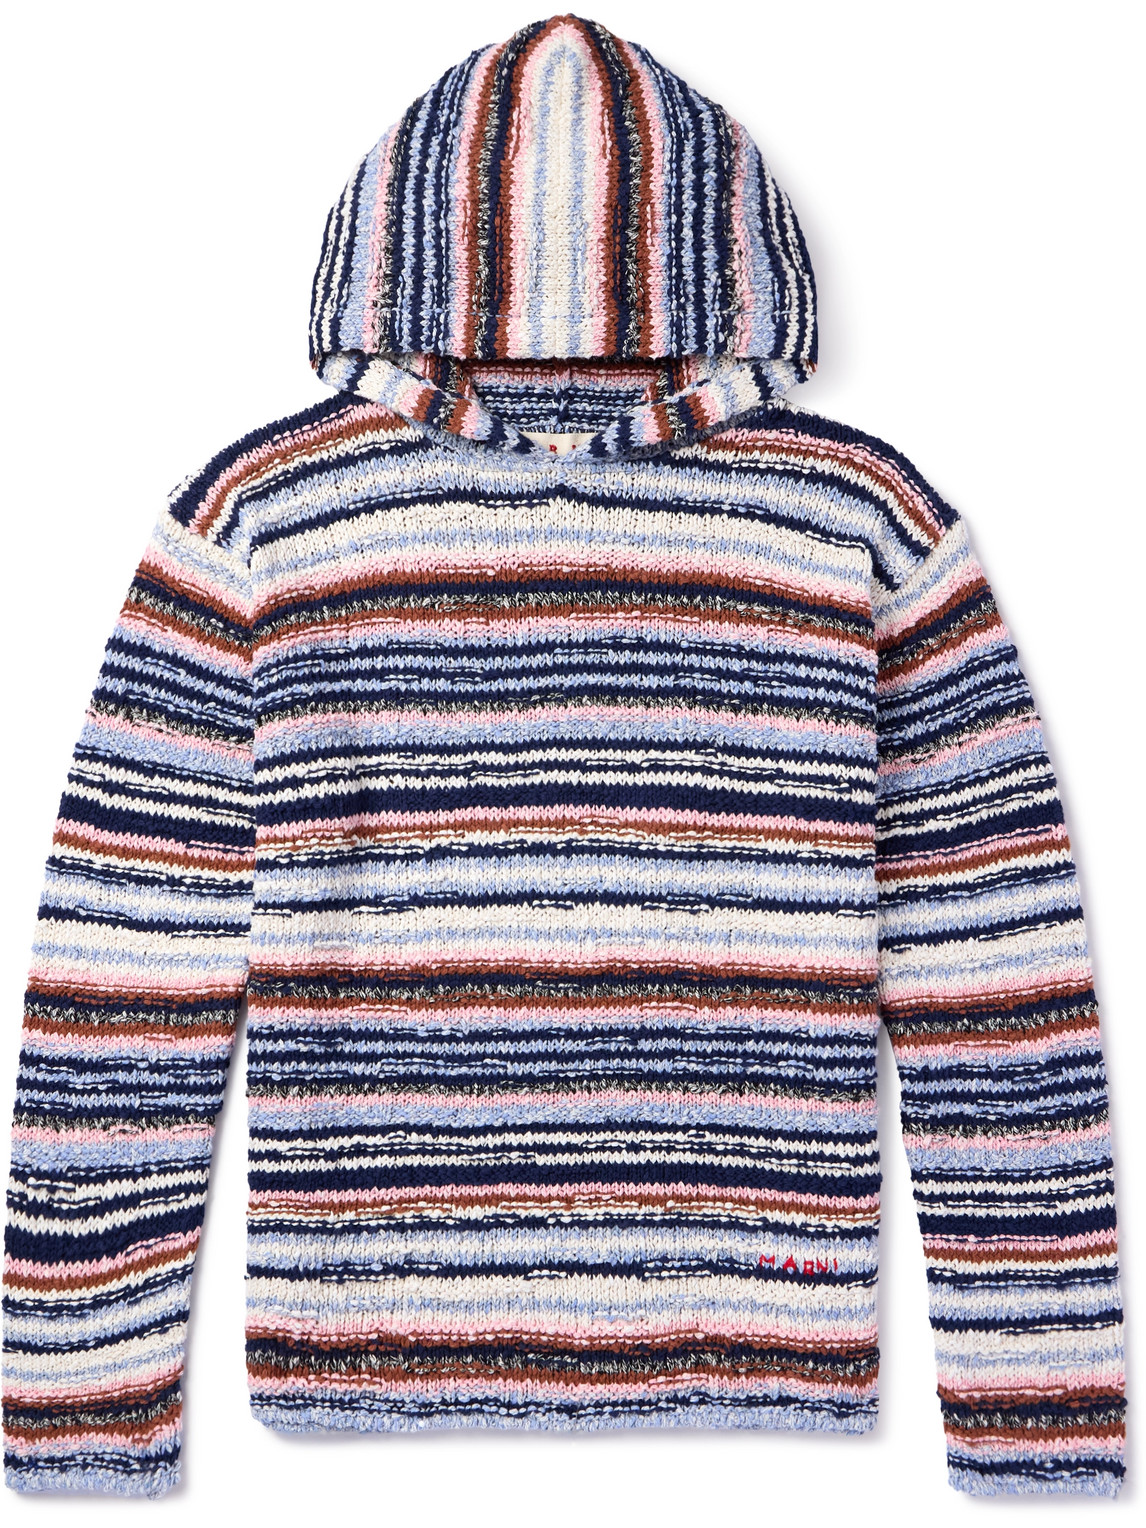 Striped Crocheted Cotton Hoodie